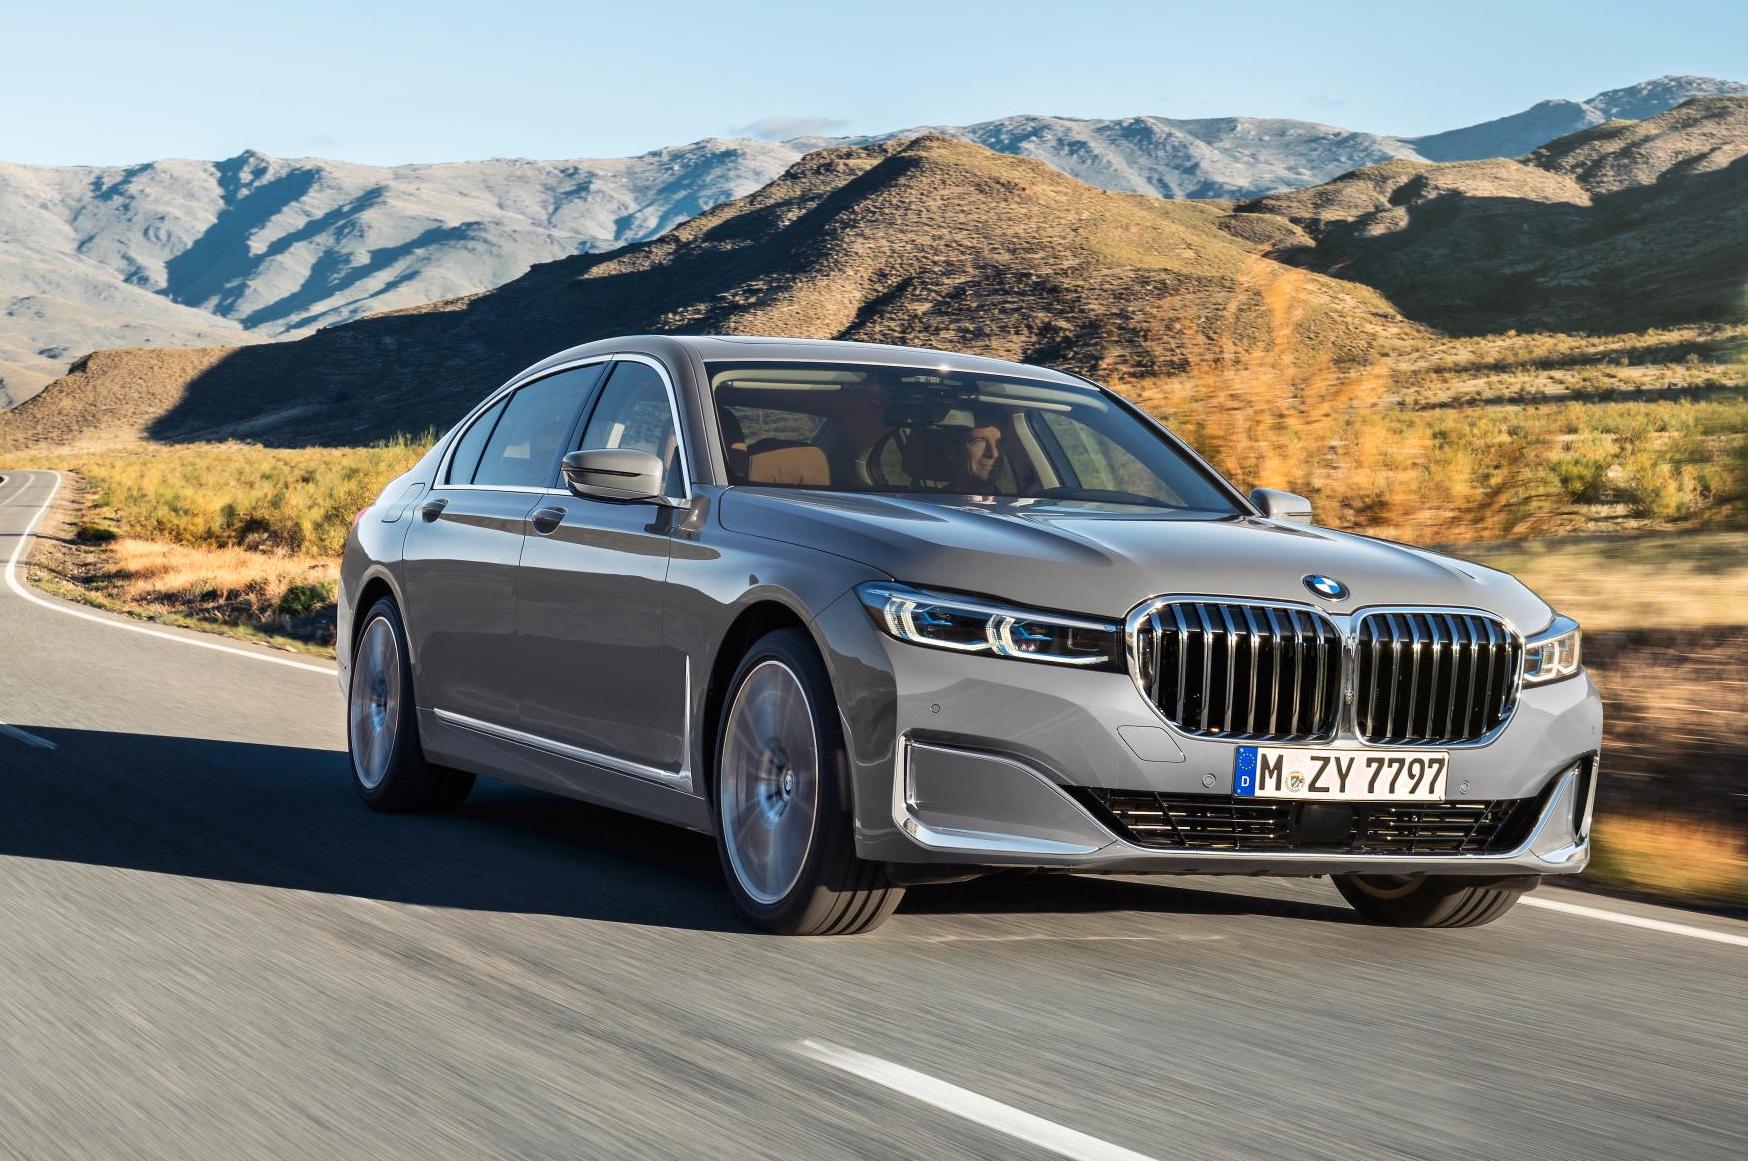 2019 BMW 7 Series facelift debuts, looks prominent